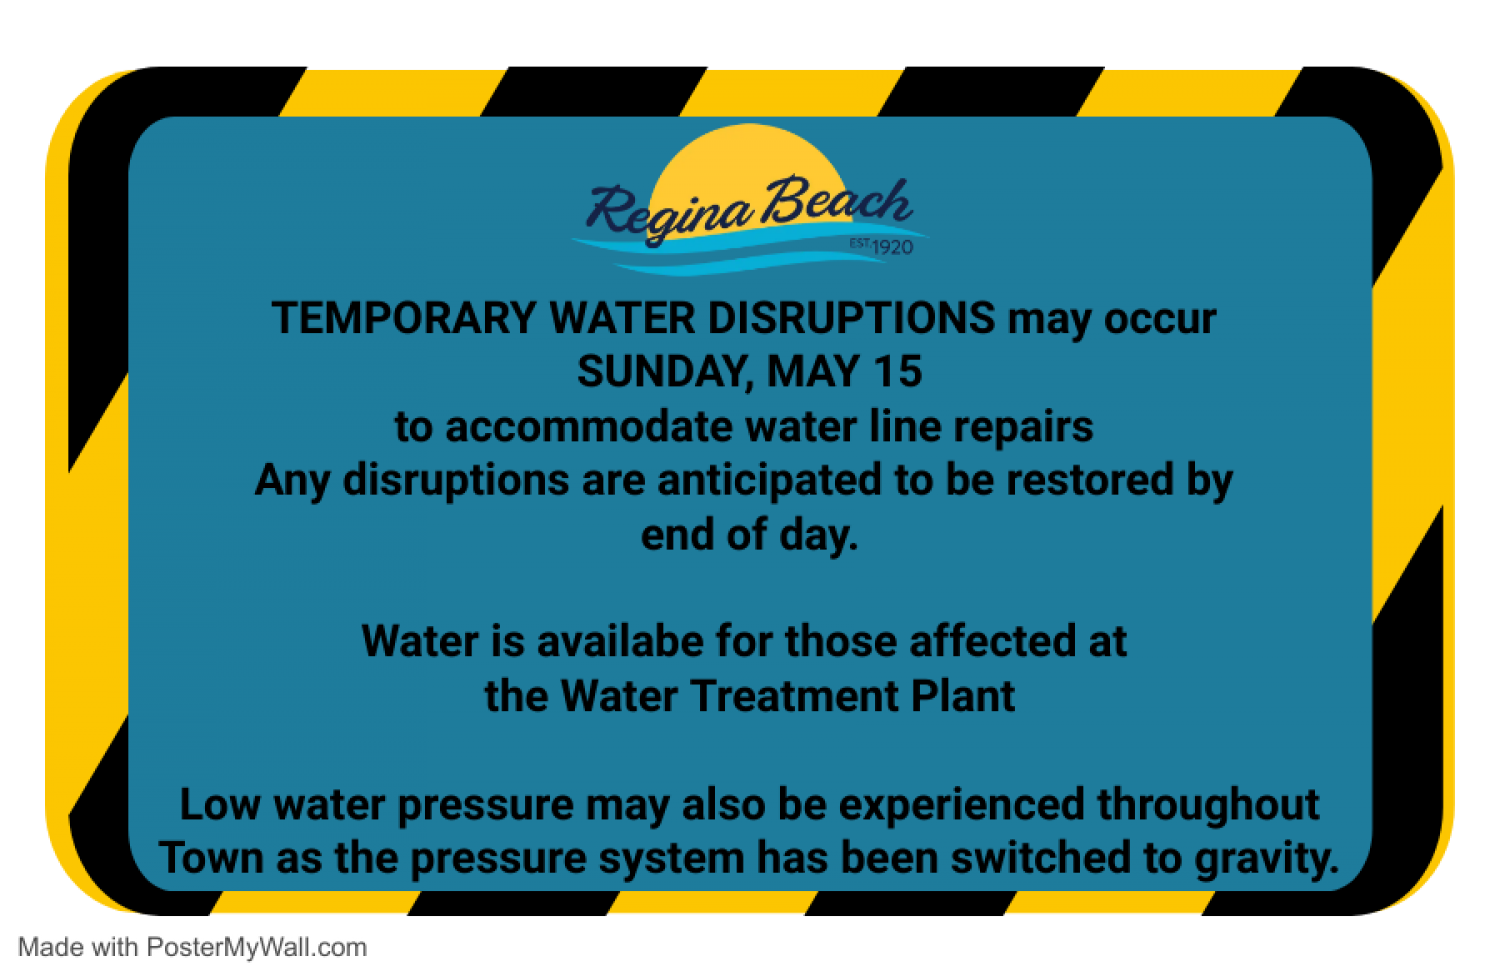 Low Water Pressure/Possible Water Disruptions - Sun, May 15